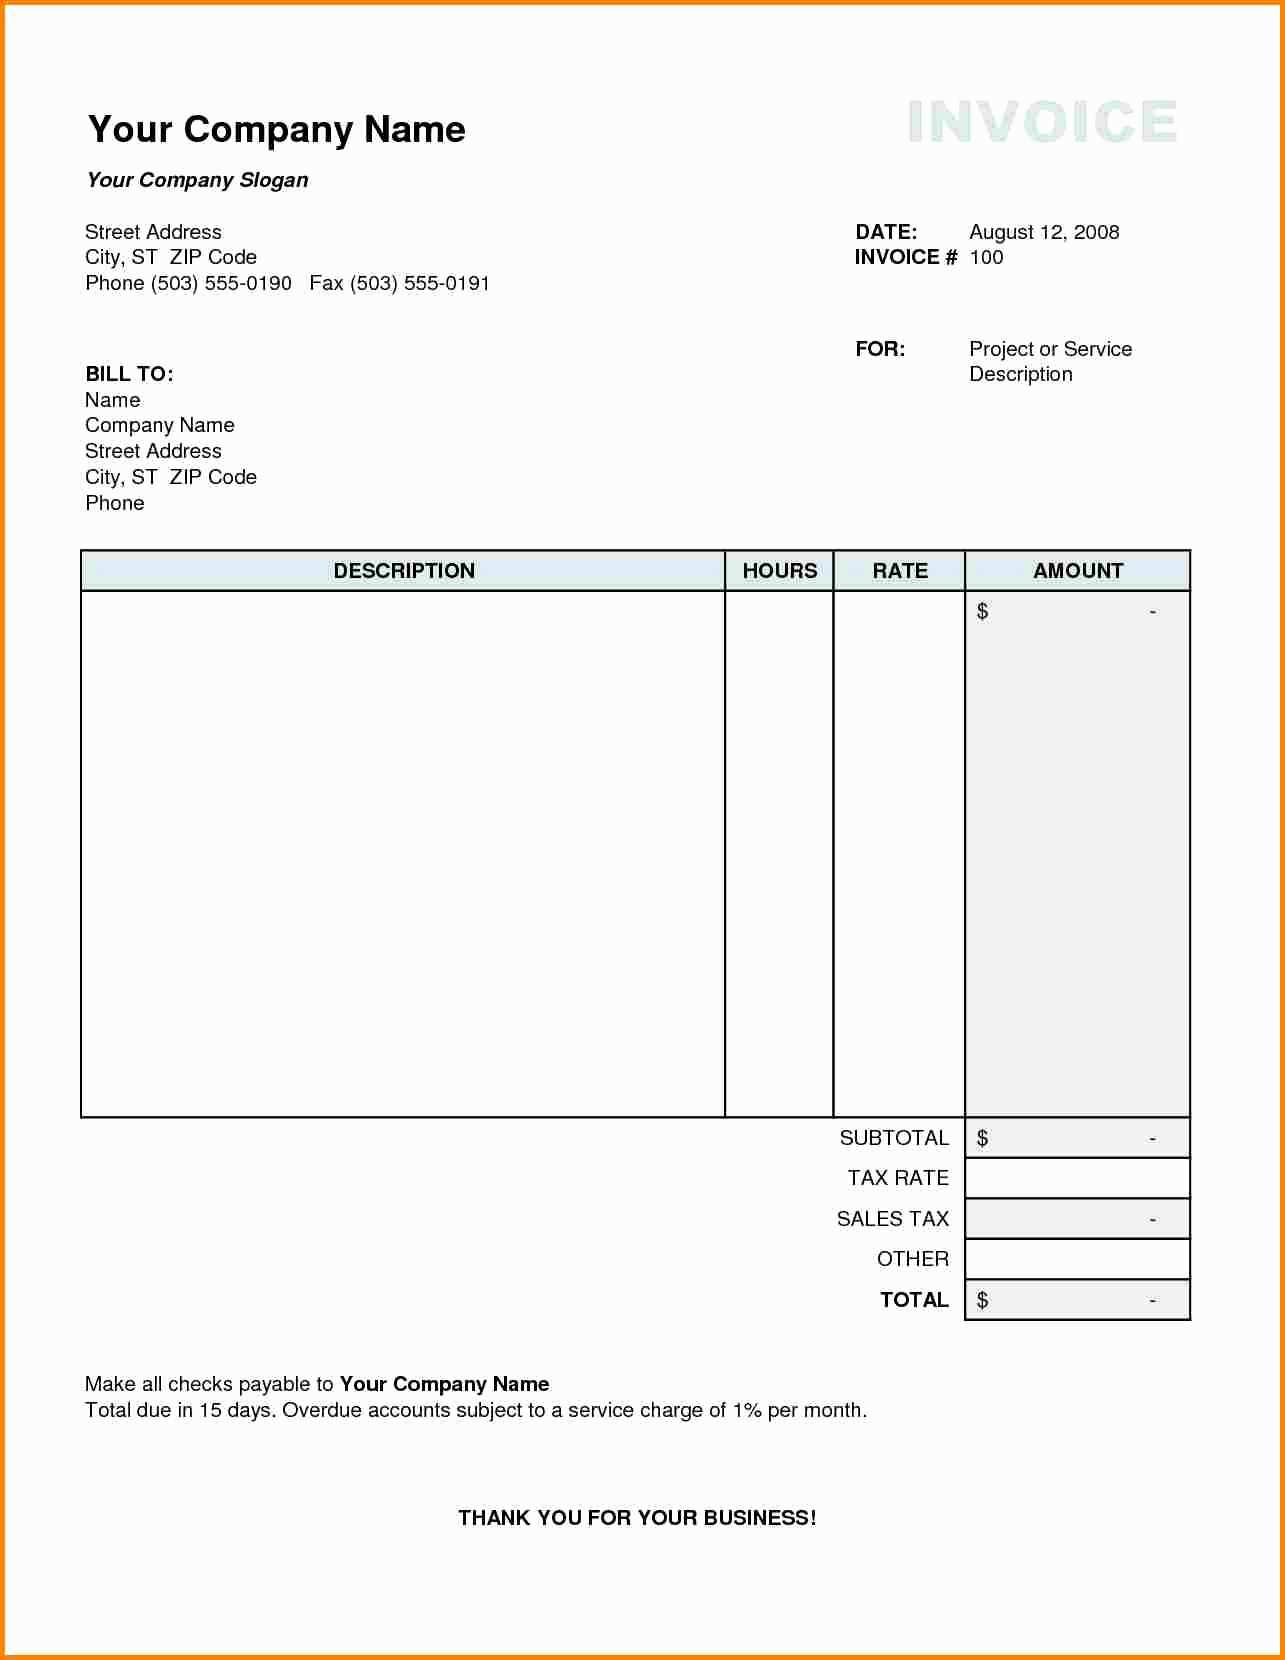 94 Report Tax Invoice Template Services Layouts by Tax Invoice Template Services